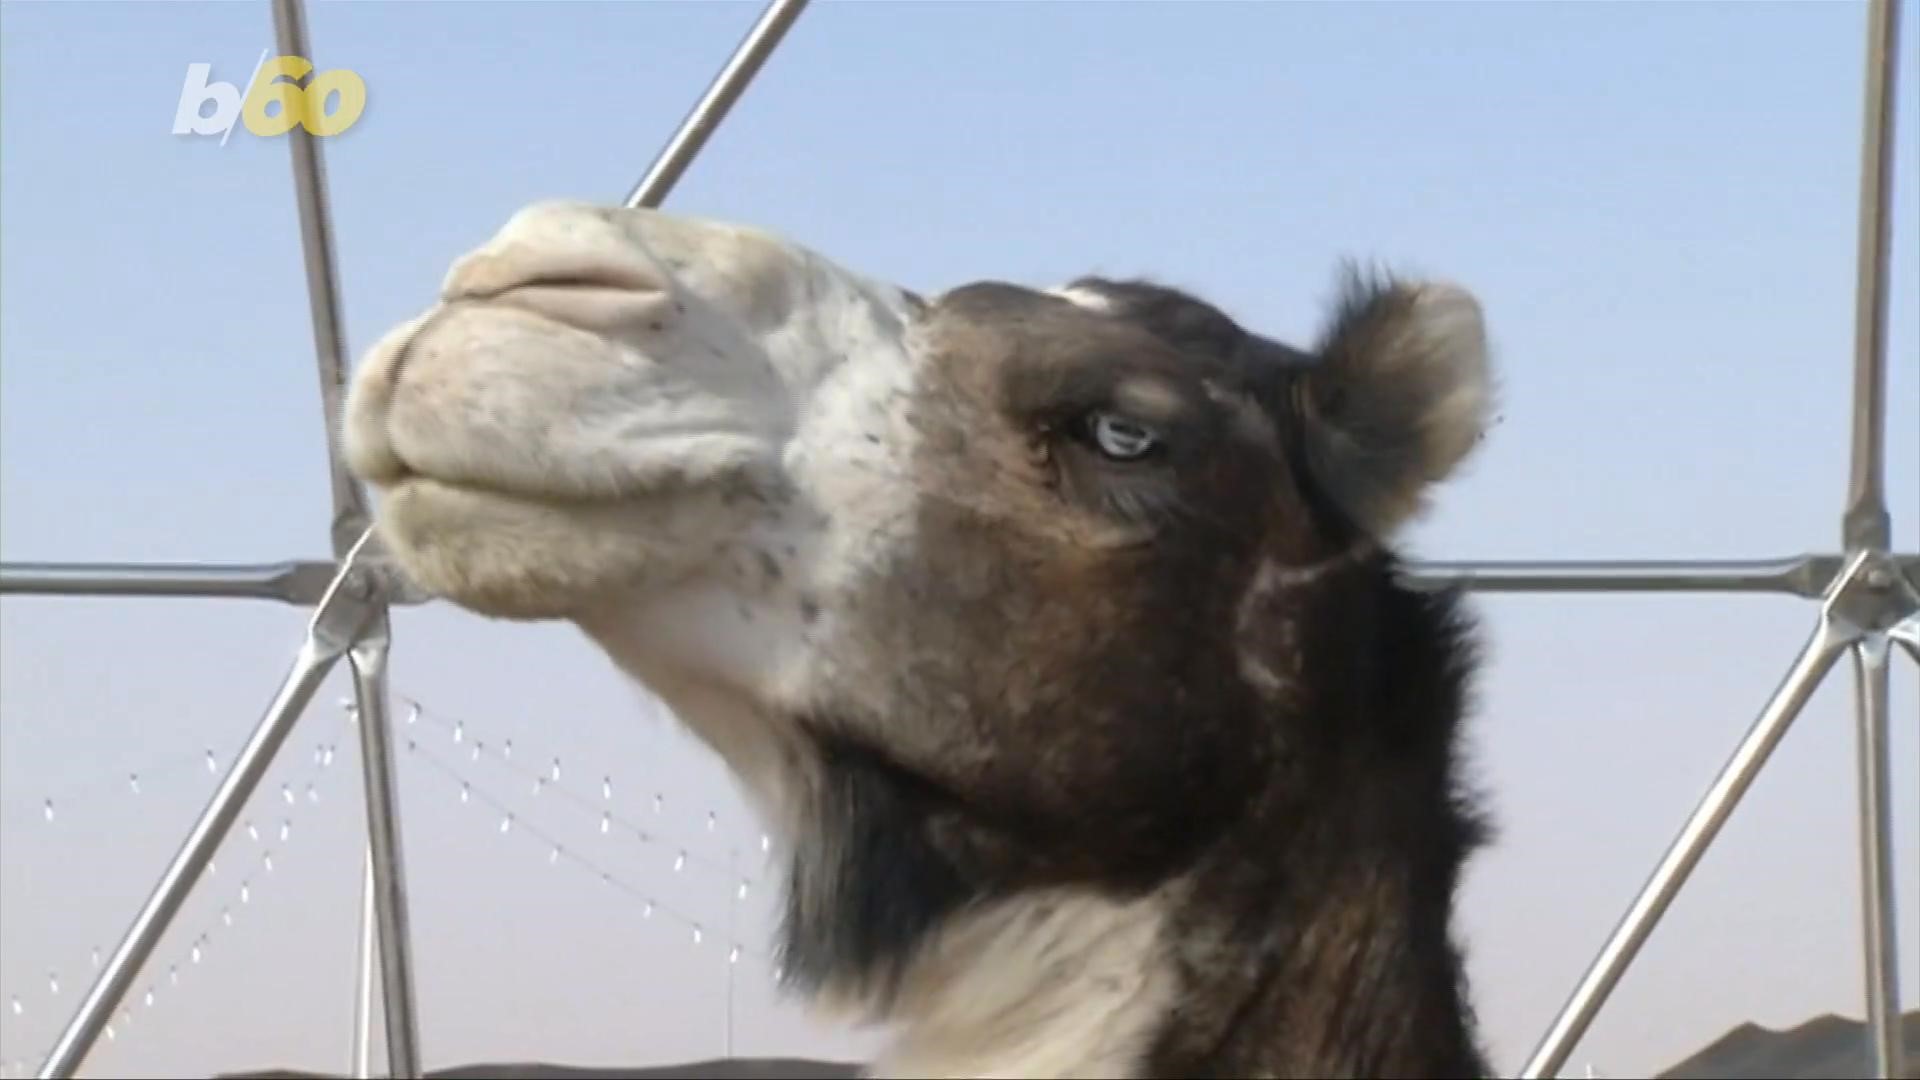 Twelve camels were disqualified from the King Abdulaziz Camel Festival after being injected with botox to enhance their looks.